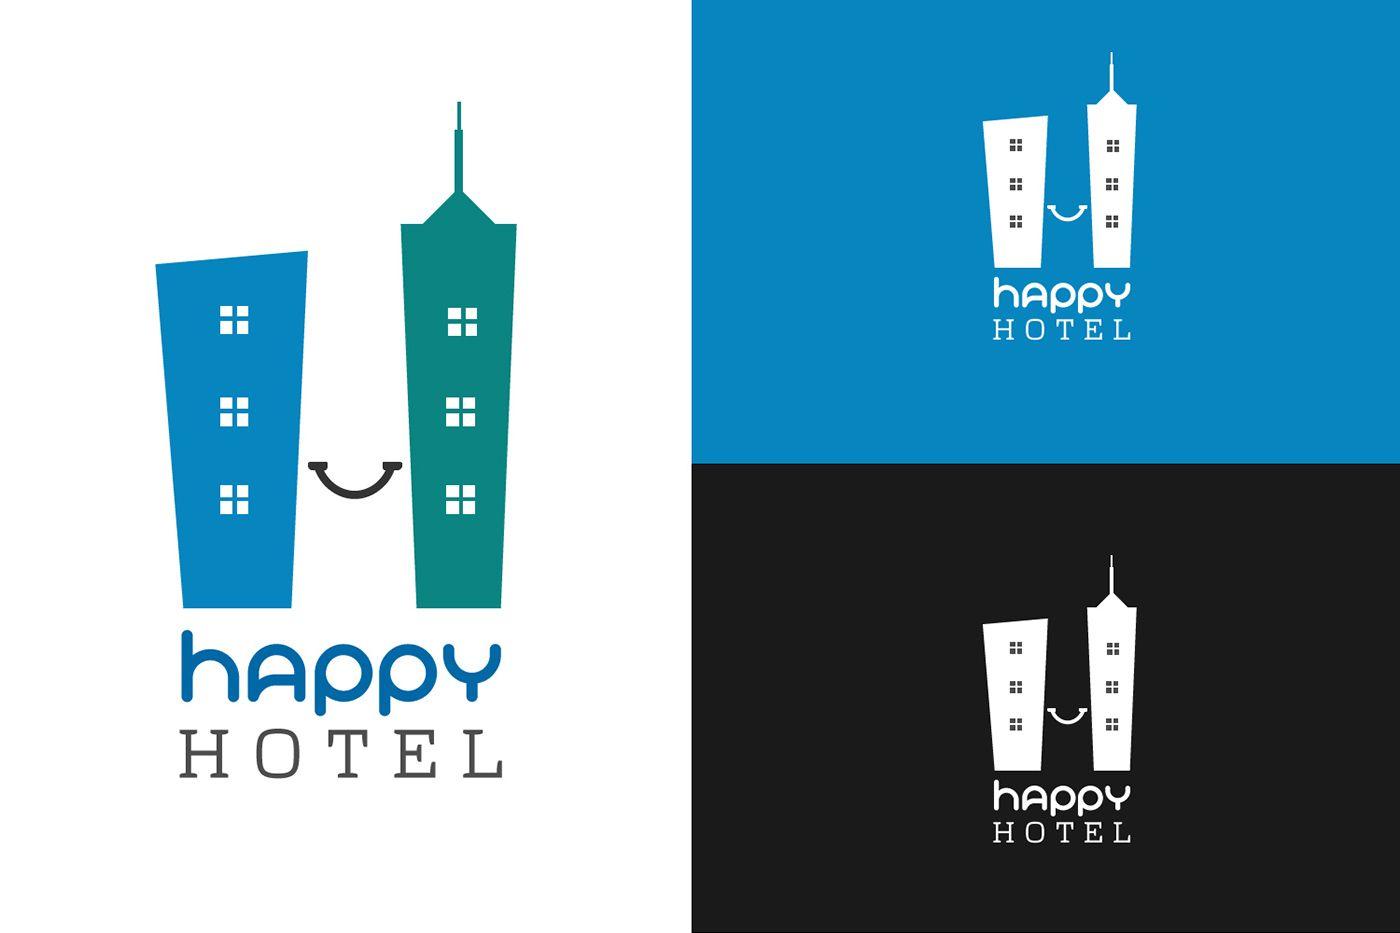 Title App Logo - Happy Hotel Logo and App part 1 on Behance